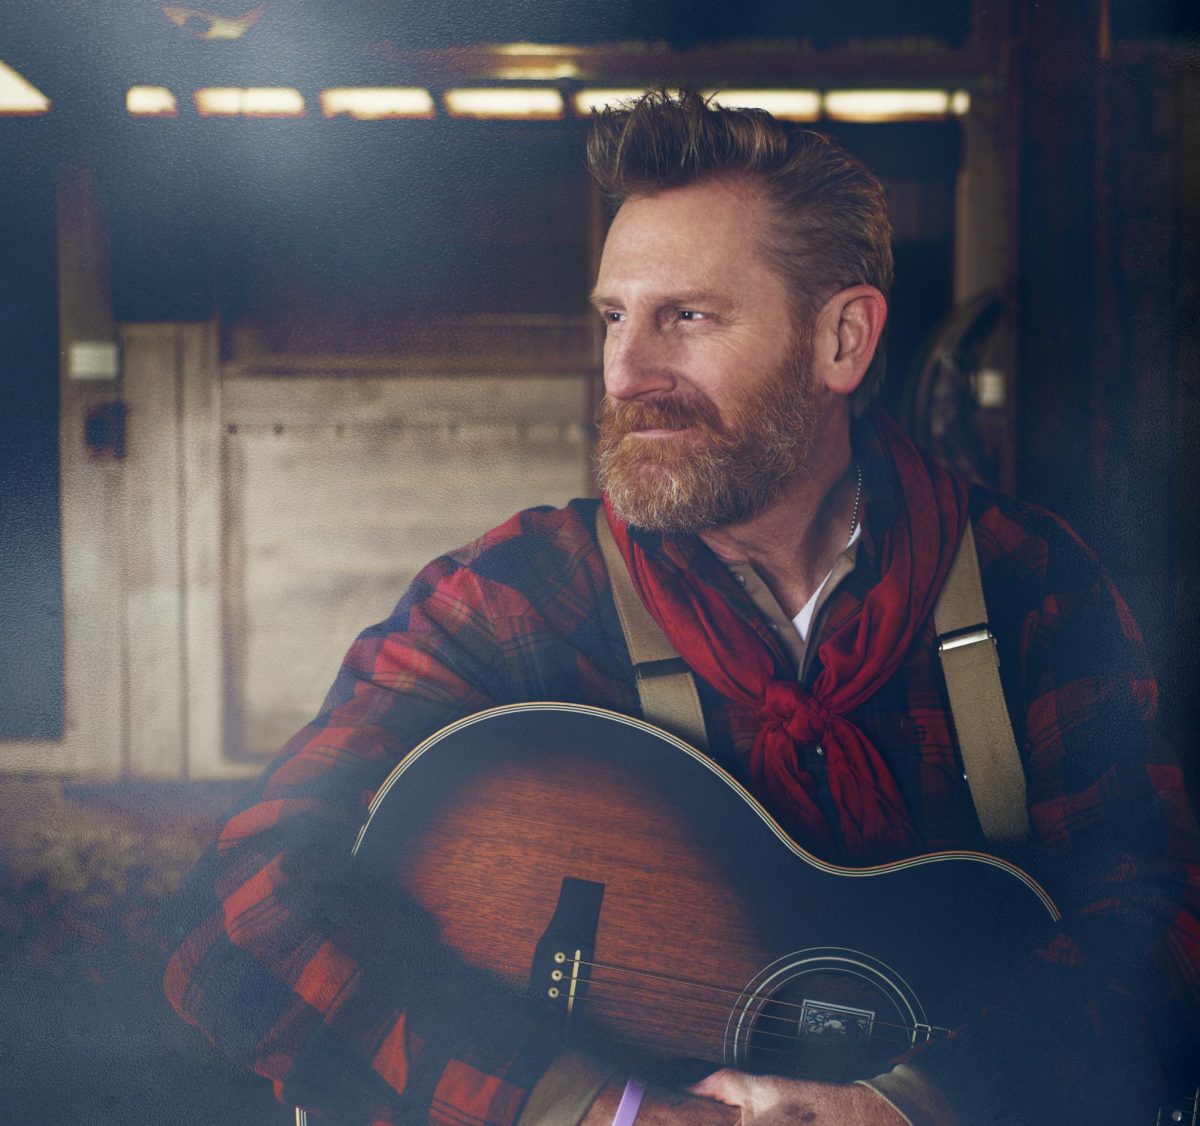 Grammy Winning Country Artist Rory Feek Shares his Experience with Aspiring Songwriters